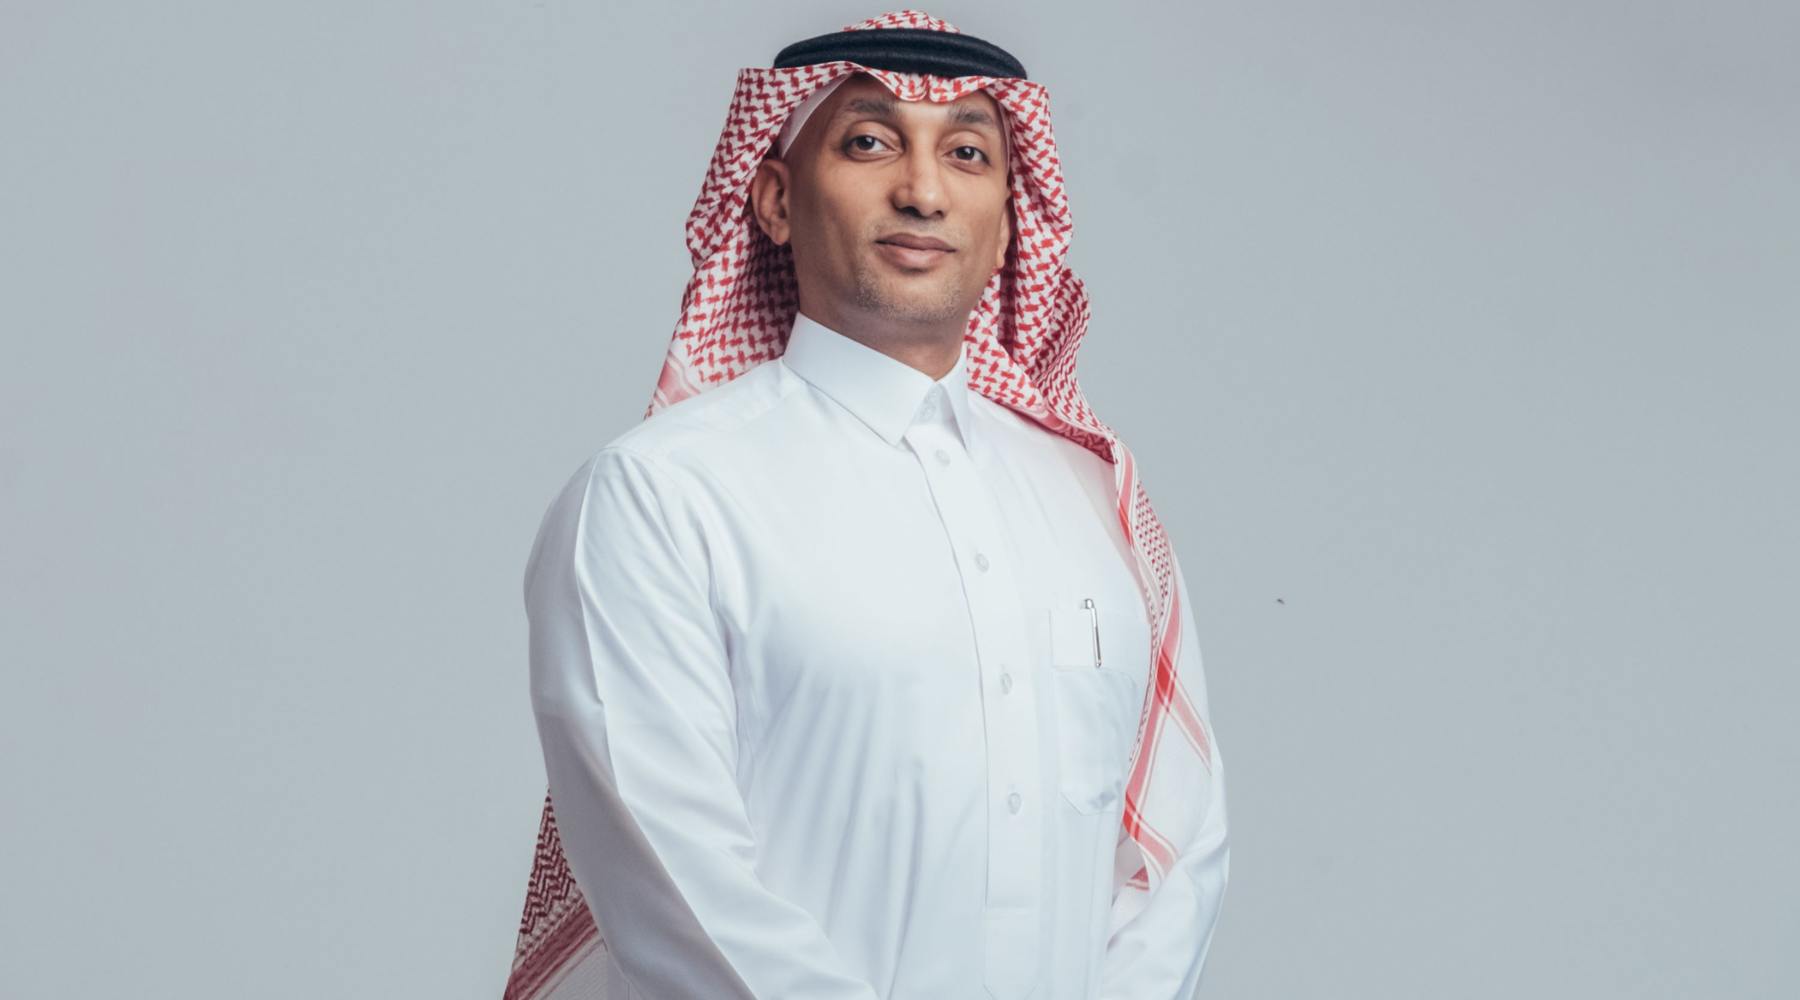 Publicis Groupe ME Appoints Adel Baraja as Chief Executive Officer of Publicis Communications KSA